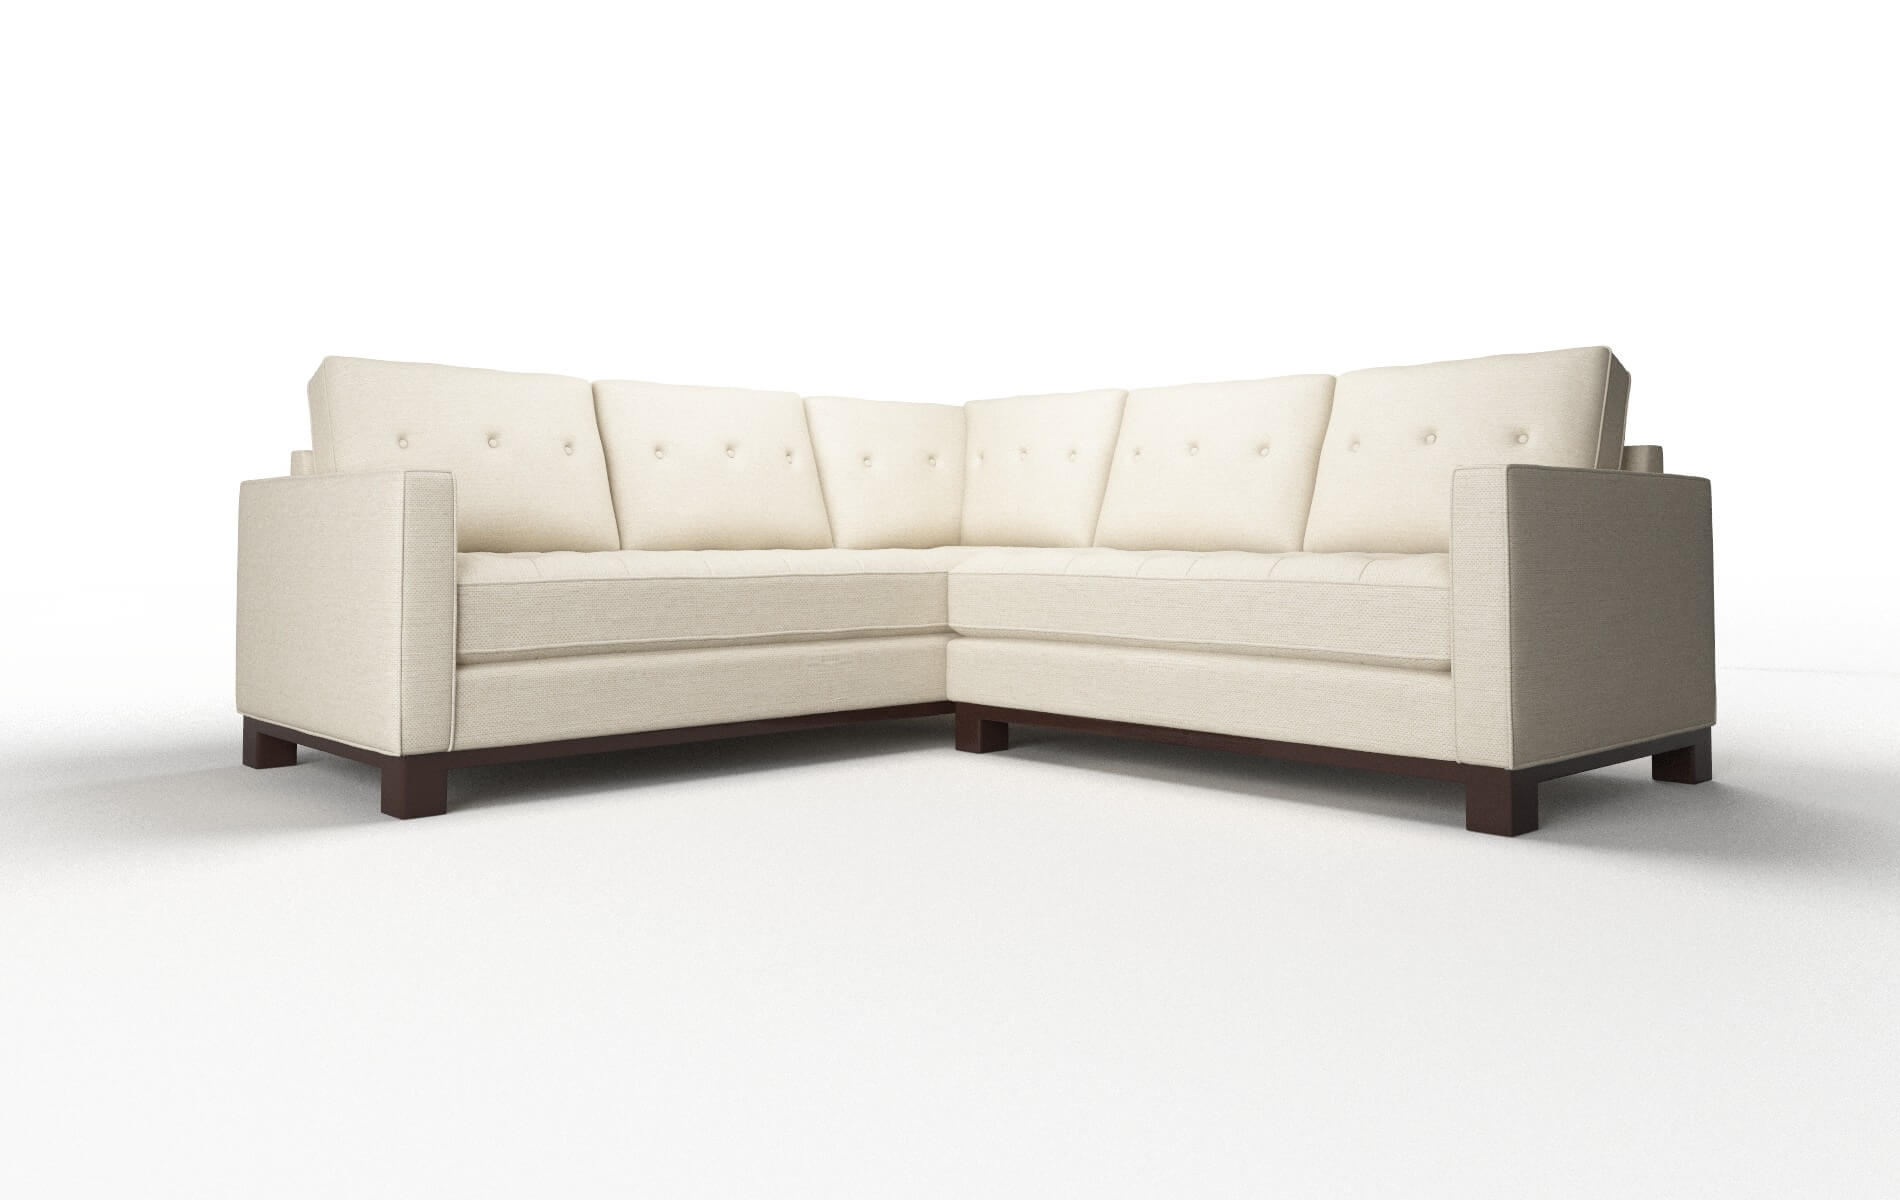 Syros Chance Sand Sectional espresso legs 1